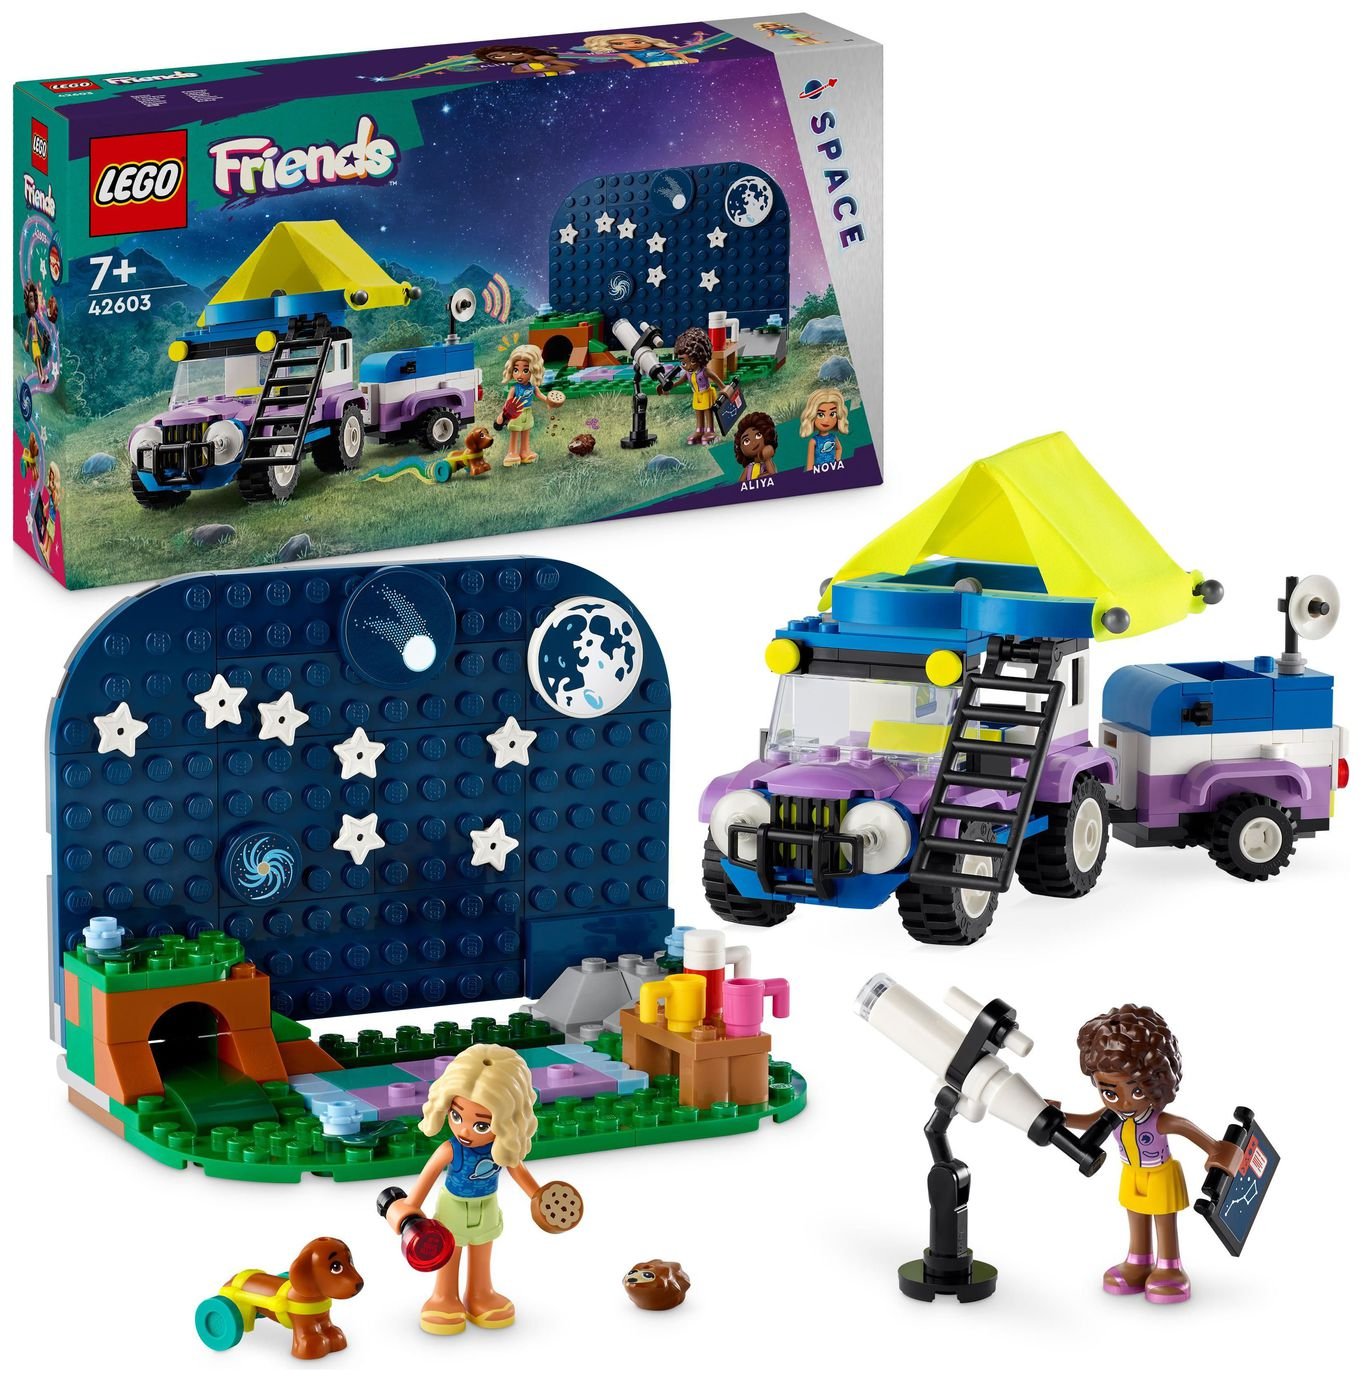 LEGO Friends Stargazing Camping Set with 4x4 Toy Car 42603